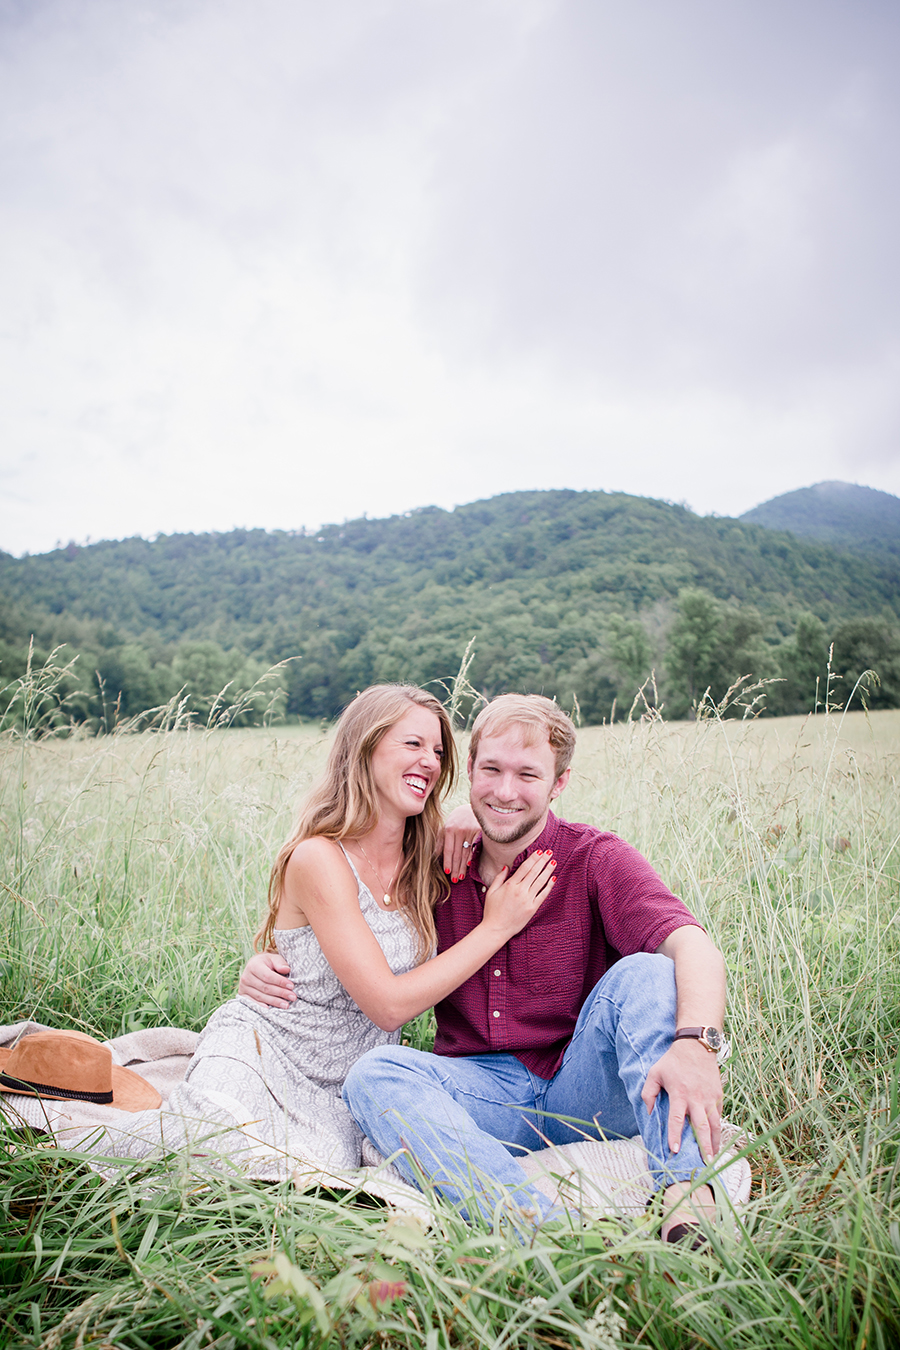 Sitting on a blanket laughing engagement photo by Knoxville Wedding Photographer, Amanda May Photos.